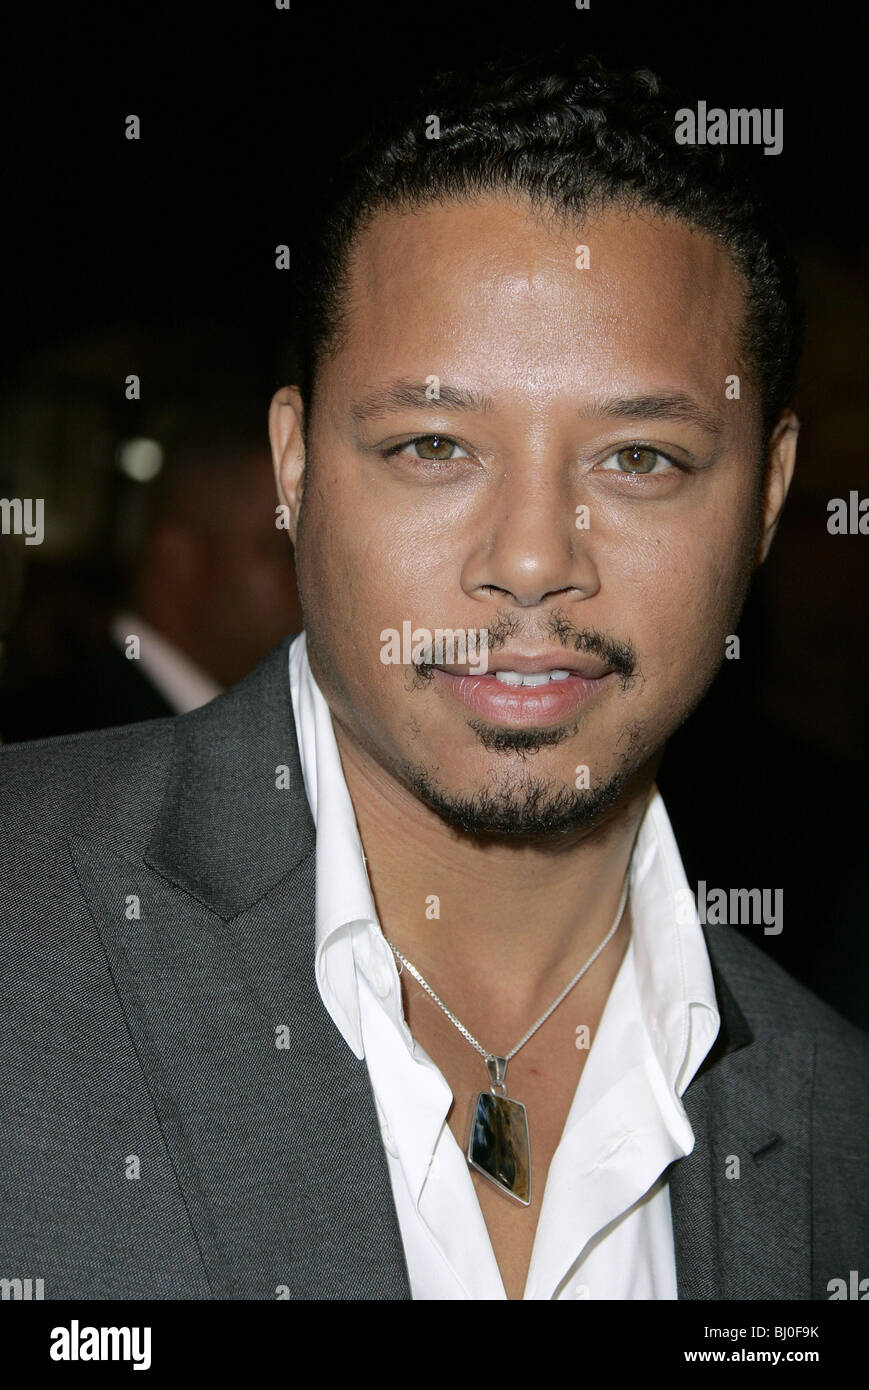 TERRENCE HOWARD ACTOR CHINESE THEATRE HOLLYWOOD LOS ANGELES USA 02/11/2005  Stock Photo - Alamy